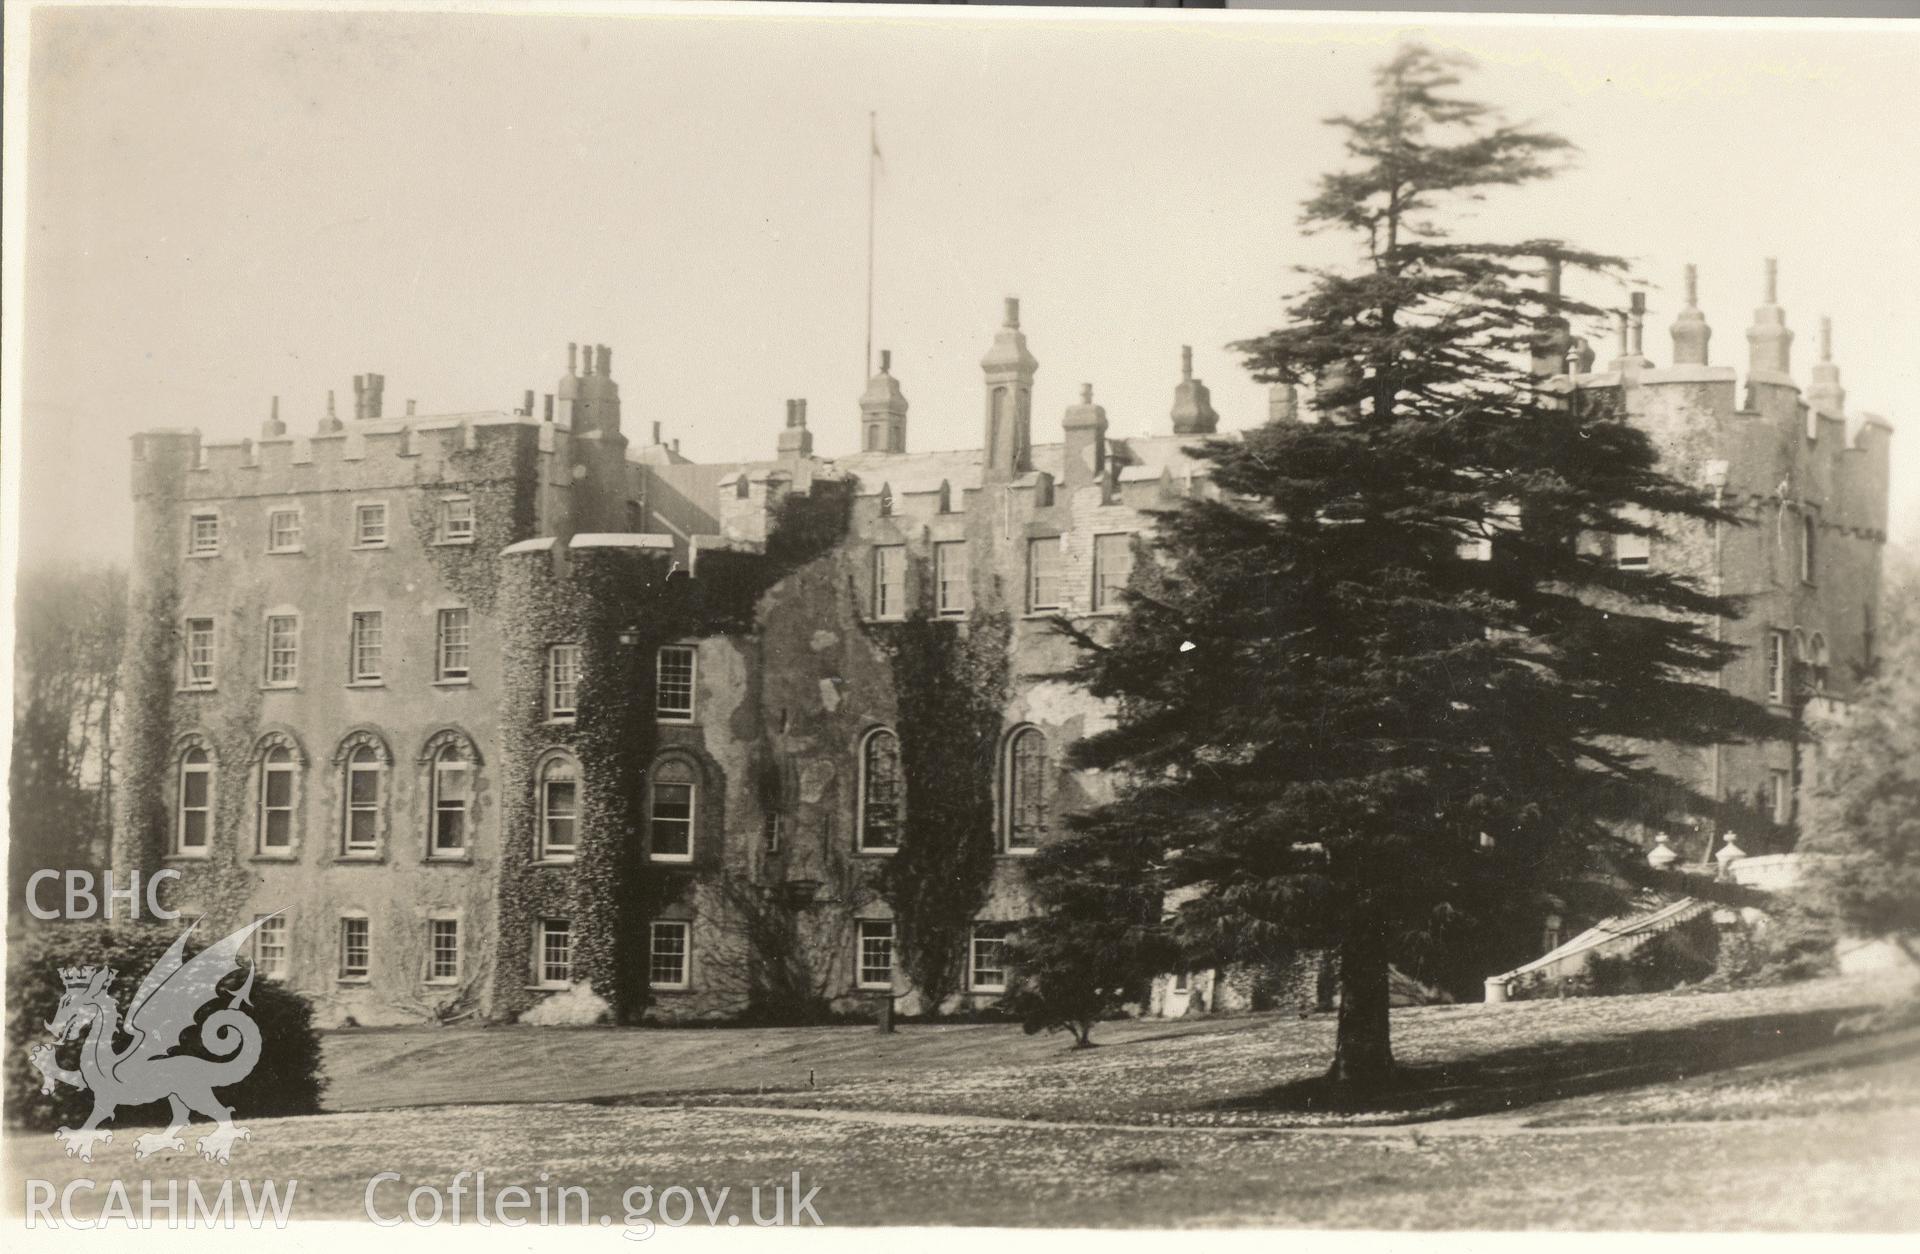 Digitised postcard image of Picton Castle, Slebech, Squibbs. Produced by Parks and Gardens Data Services, from an original item in the Peter Davis Collection at Parks and Gardens UK. We hold only web-resolution images of this collection, suitable for viewing on screen and for research purposes only. We do not hold the original images, or publication quality scans.